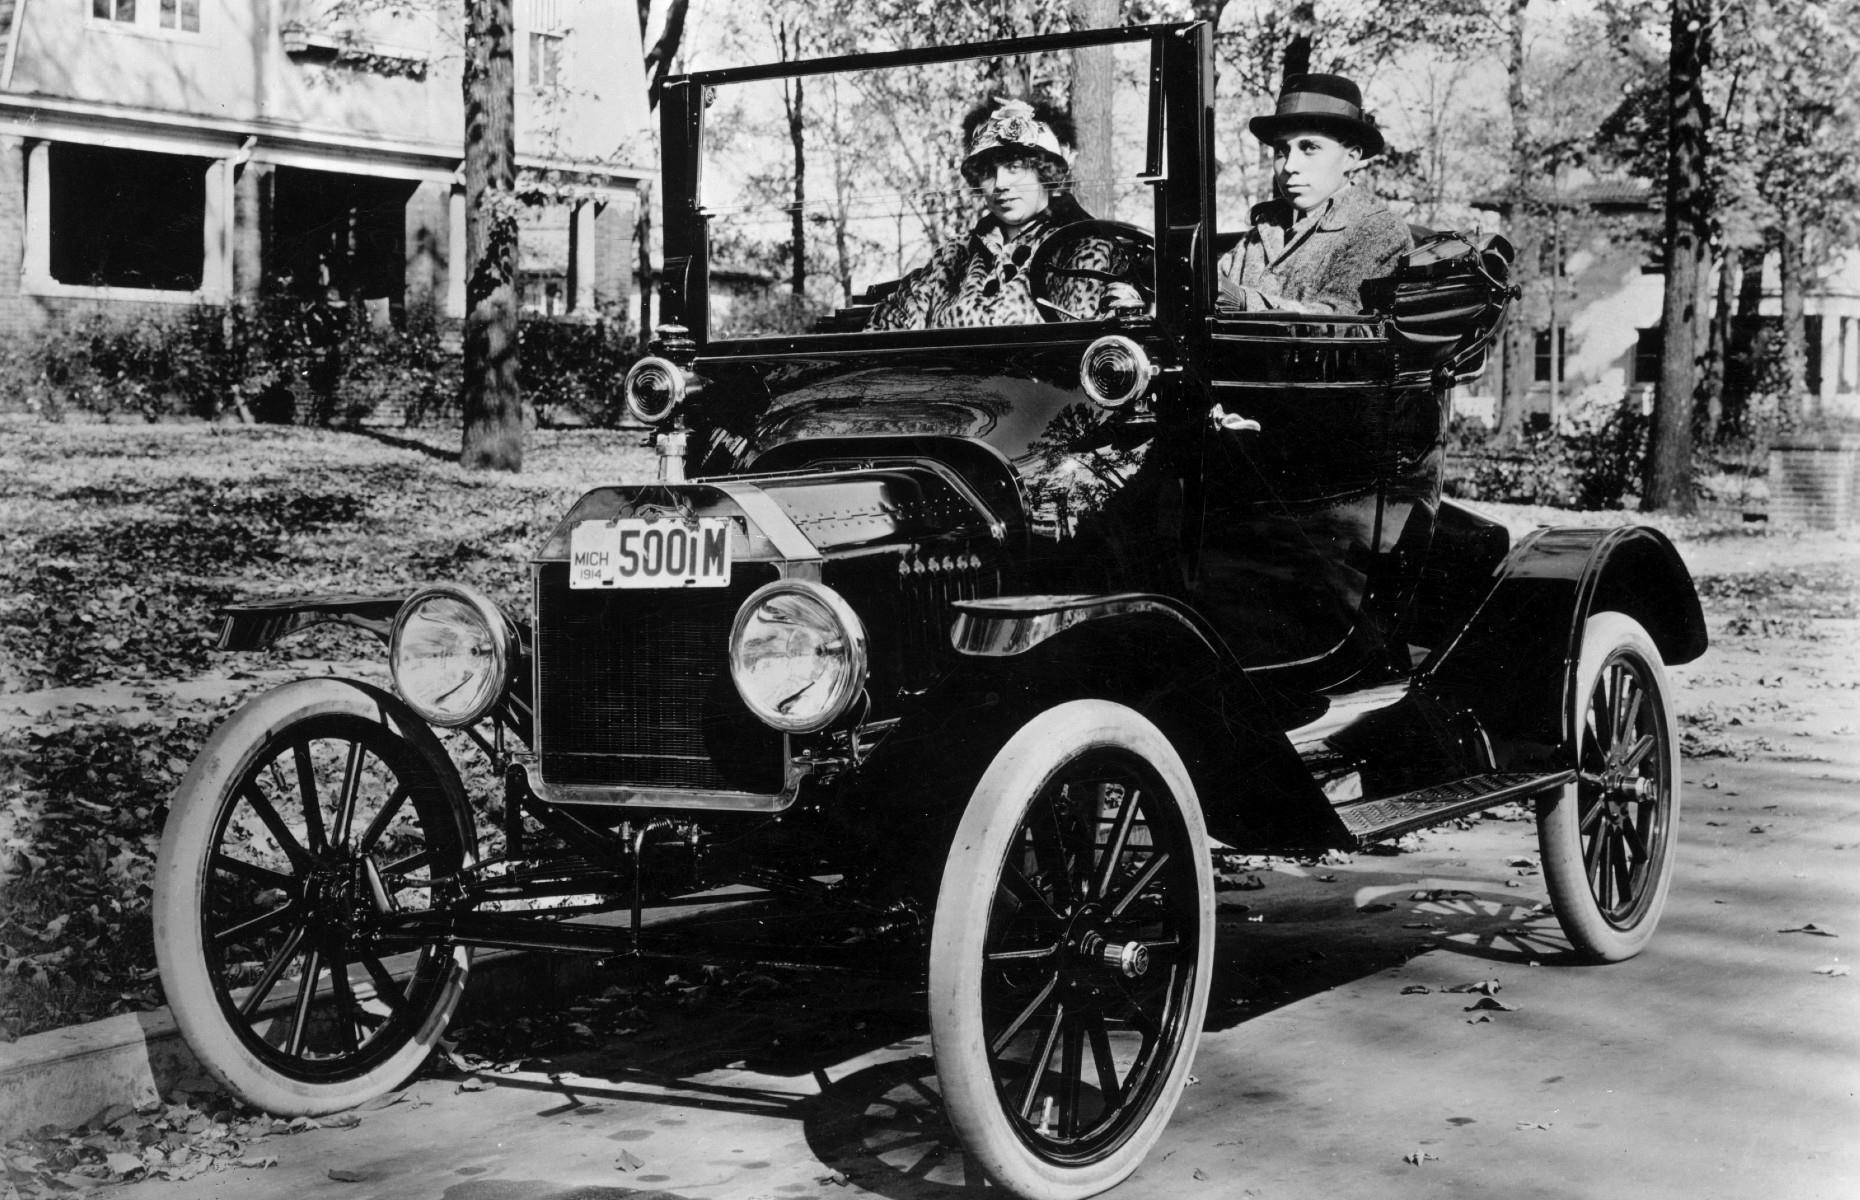 Cars: became widely affordable in 1908